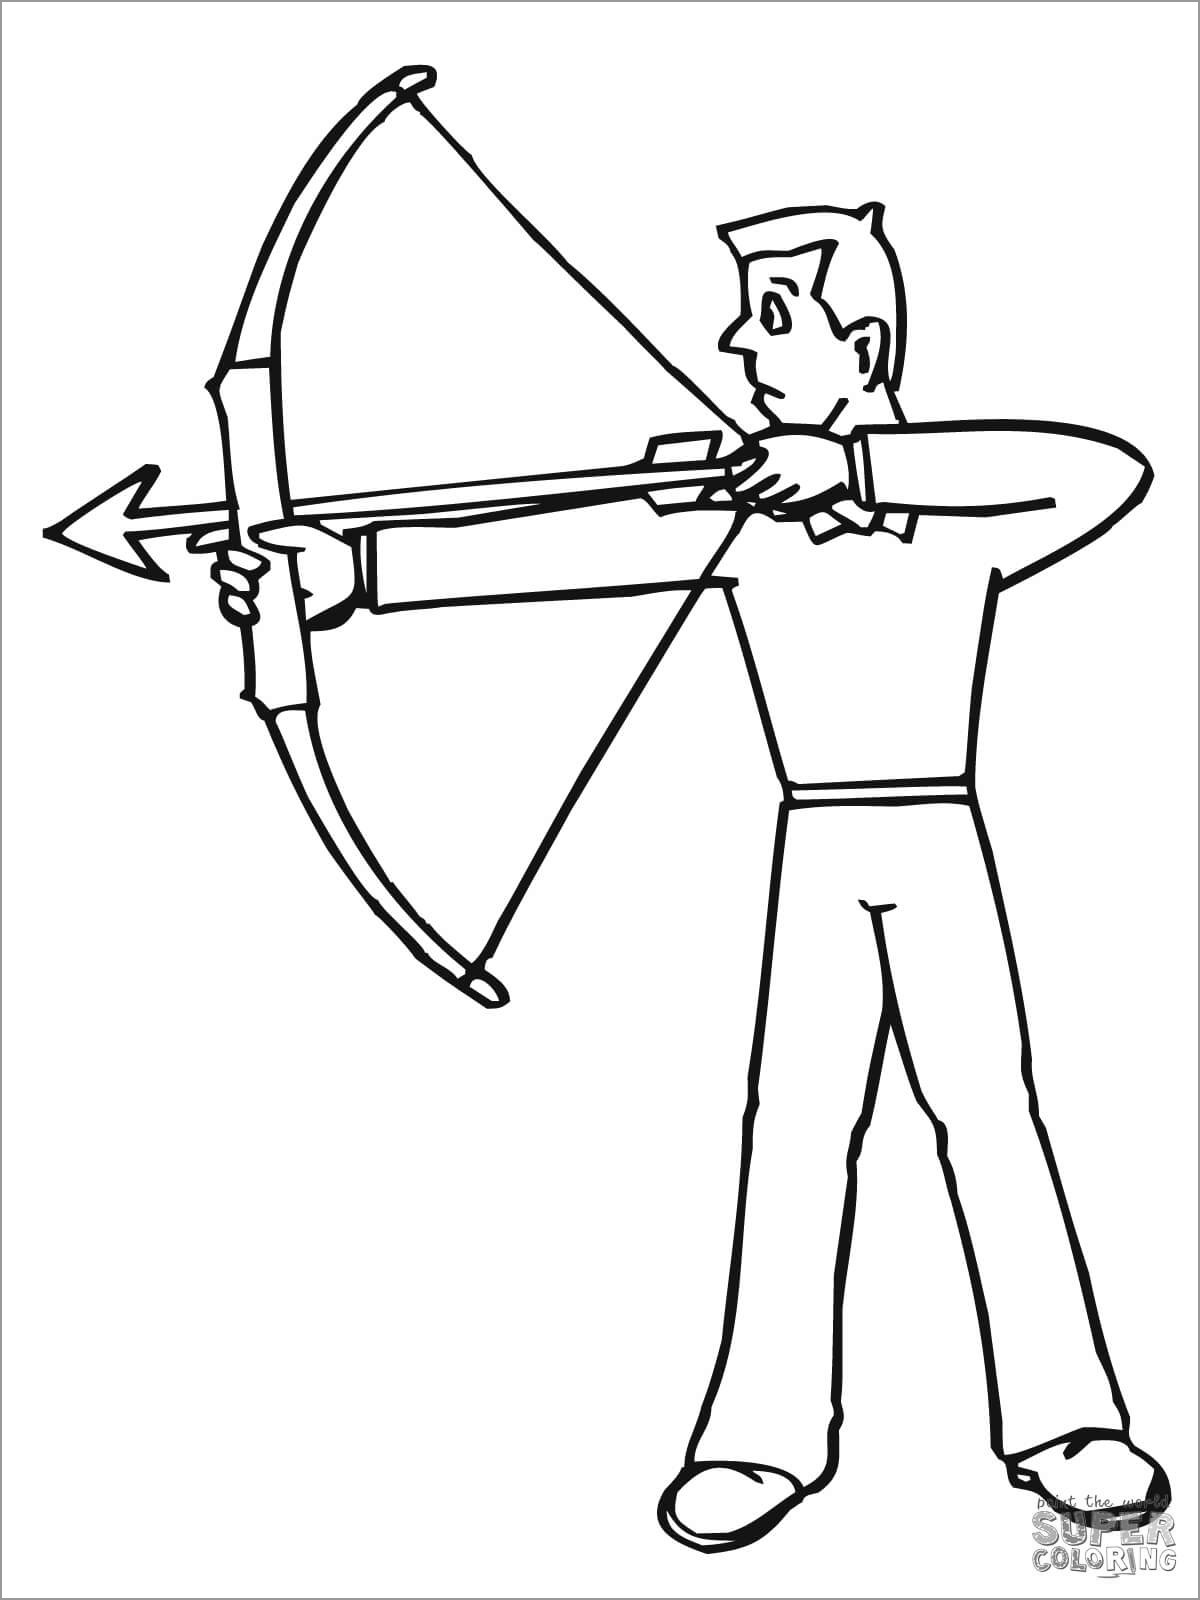 Archery Coloring Page for Kids